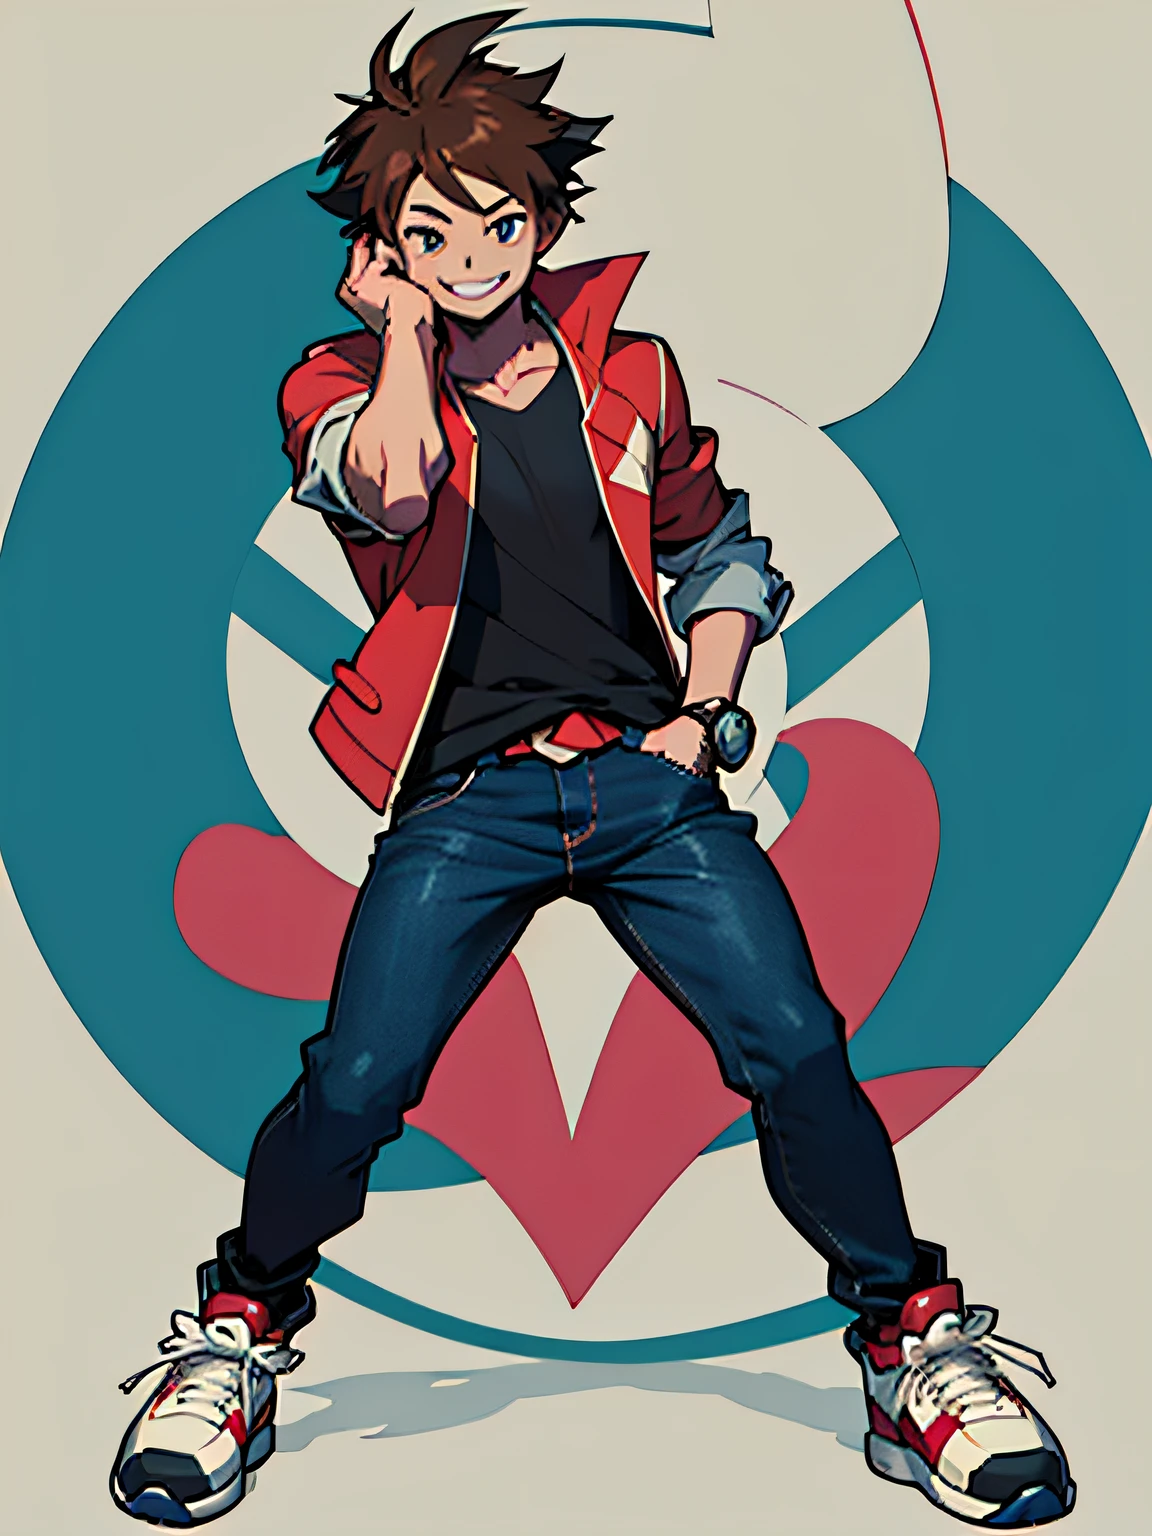 Adult male, short brown hair, black shirt with blue details, black jeans, style a pokemon trainer, full body, smiling, anime style, thin, no background, 1 boy